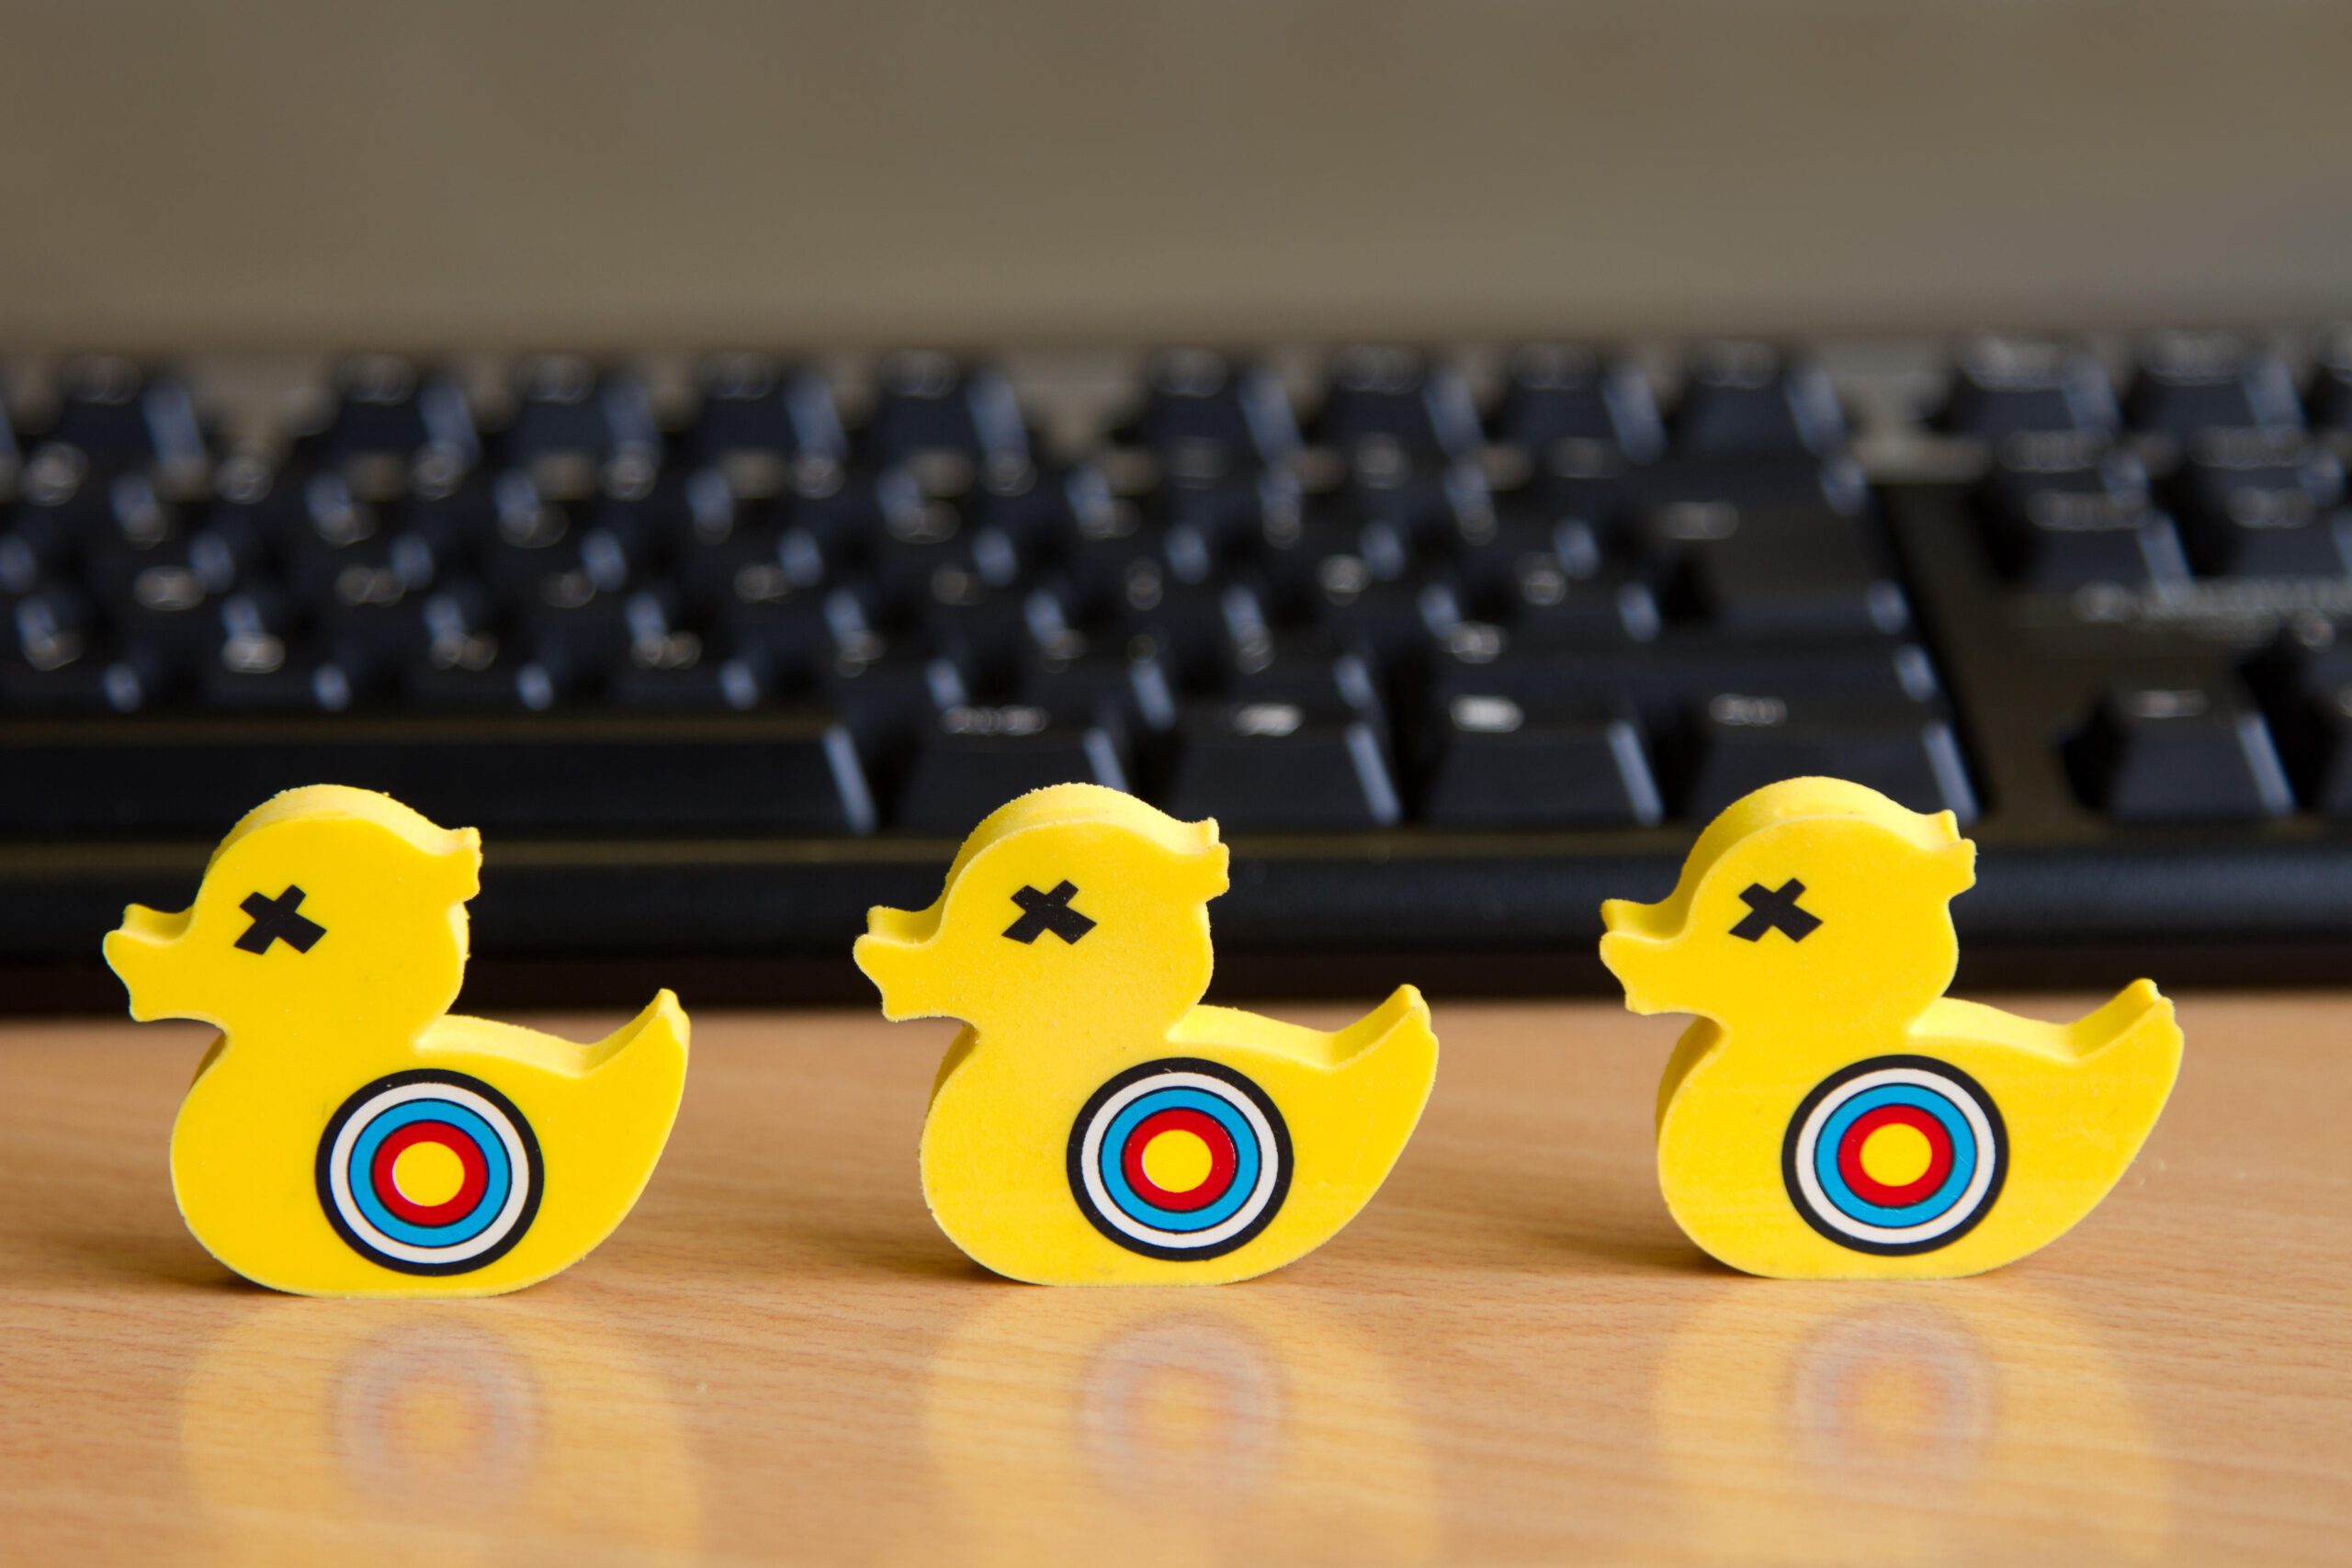 15M+ Services & Apps Remain Sitting Ducks for Known Exploits